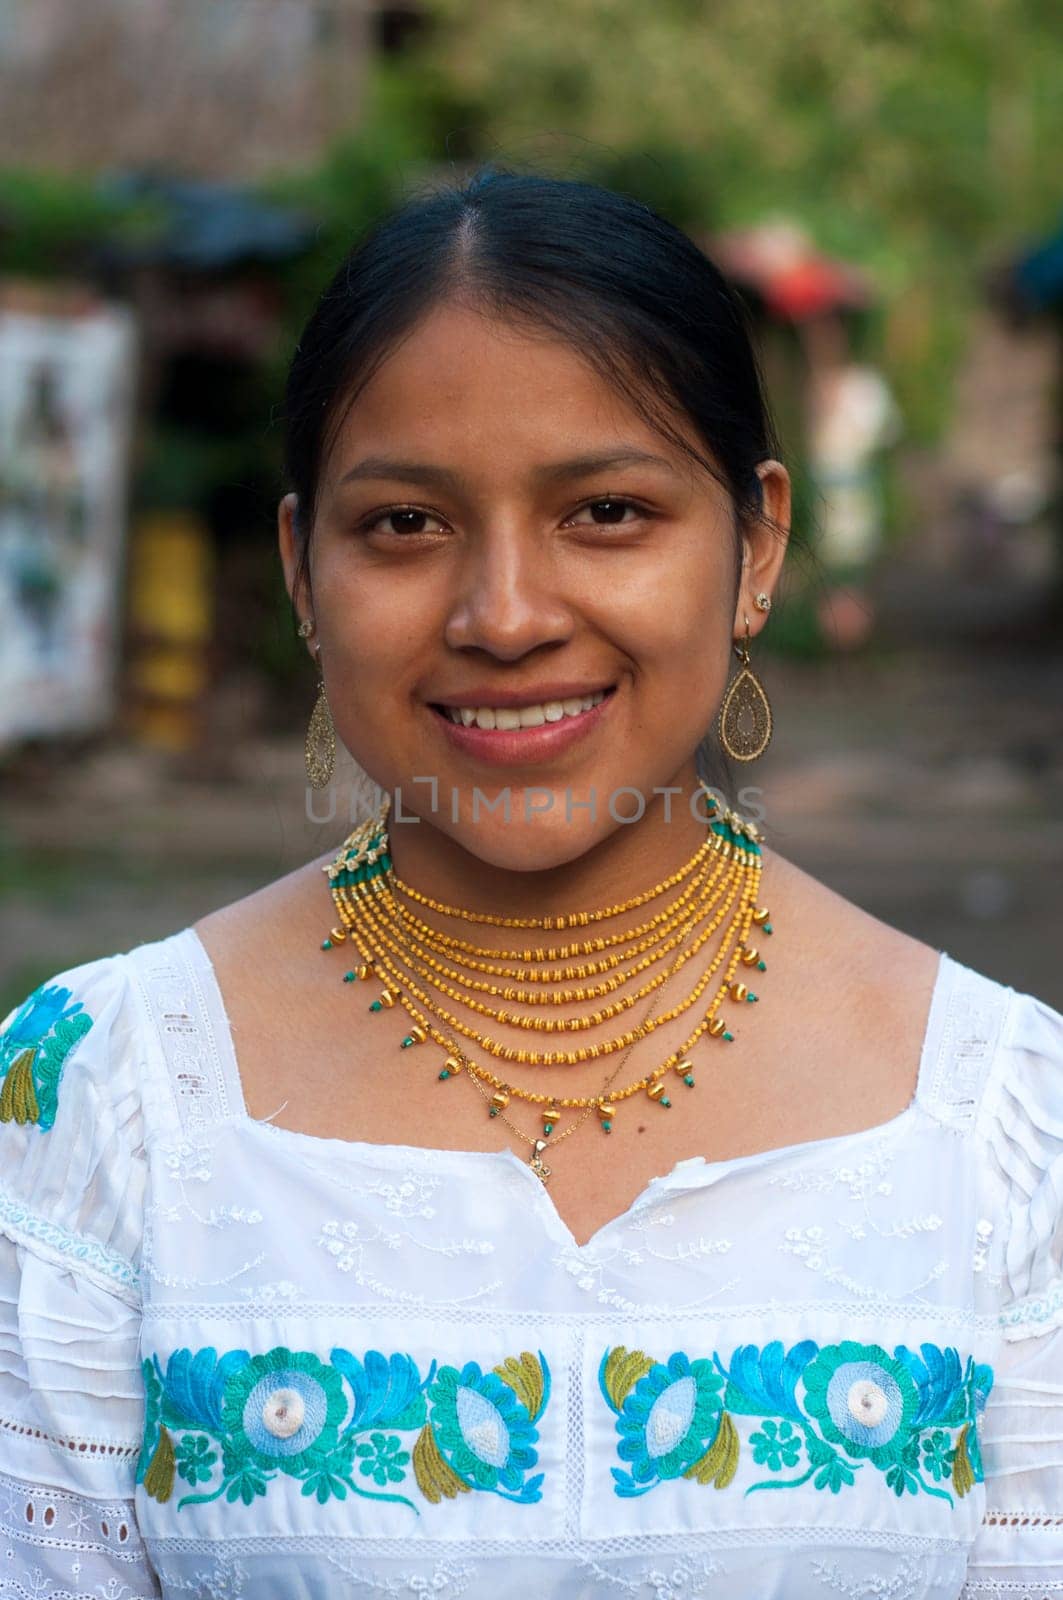 closeup of a very smiling and happy indigenous girl looking at a camera in her village. High quality photo